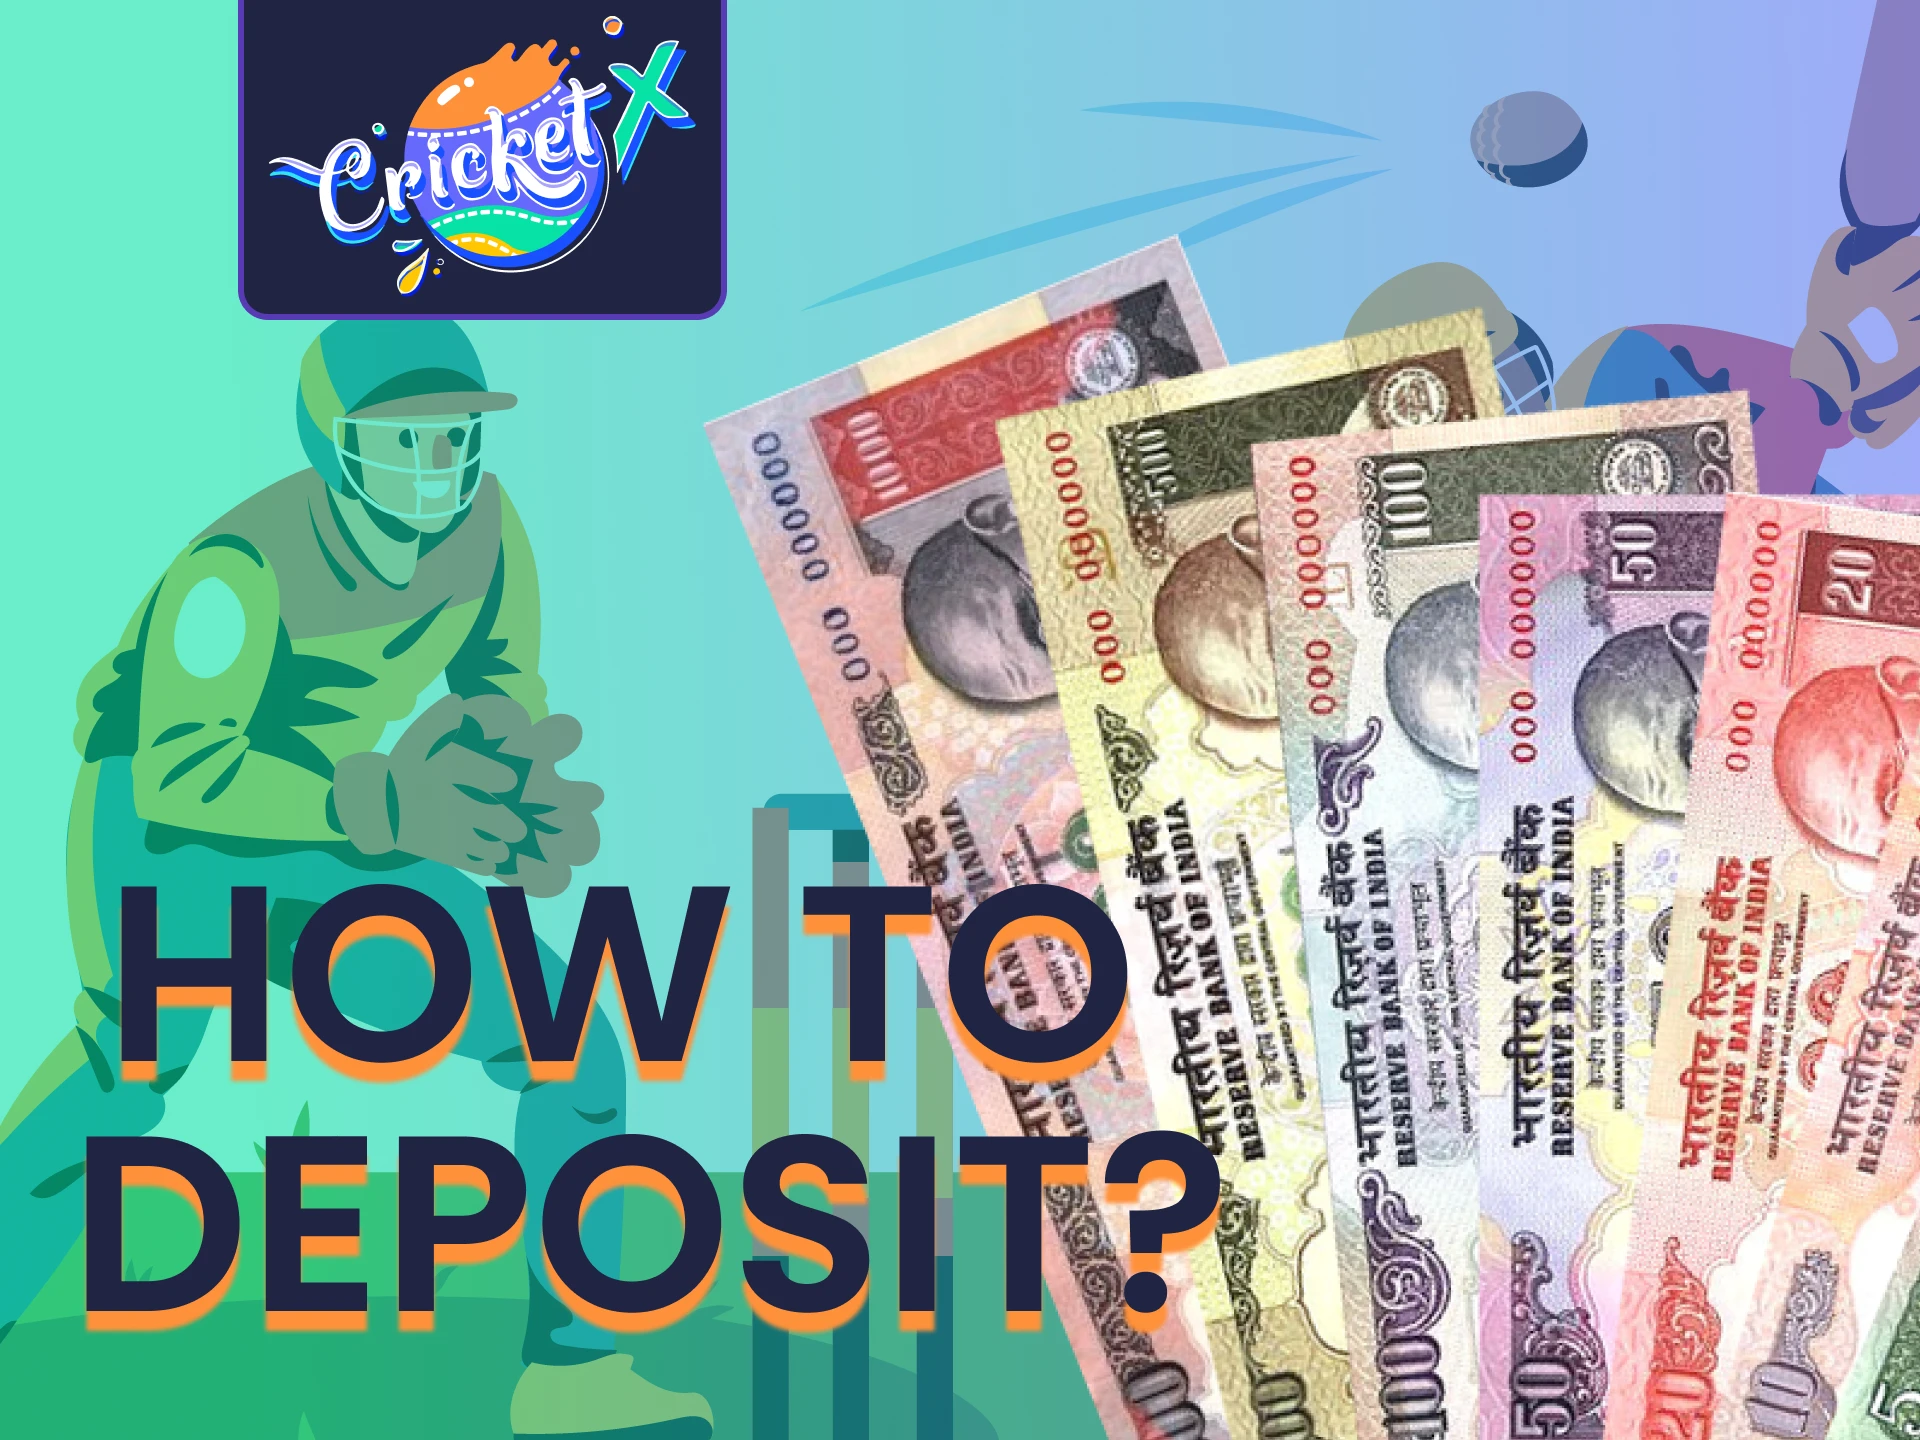 We will tell you how to top up your account to play Cricket X.